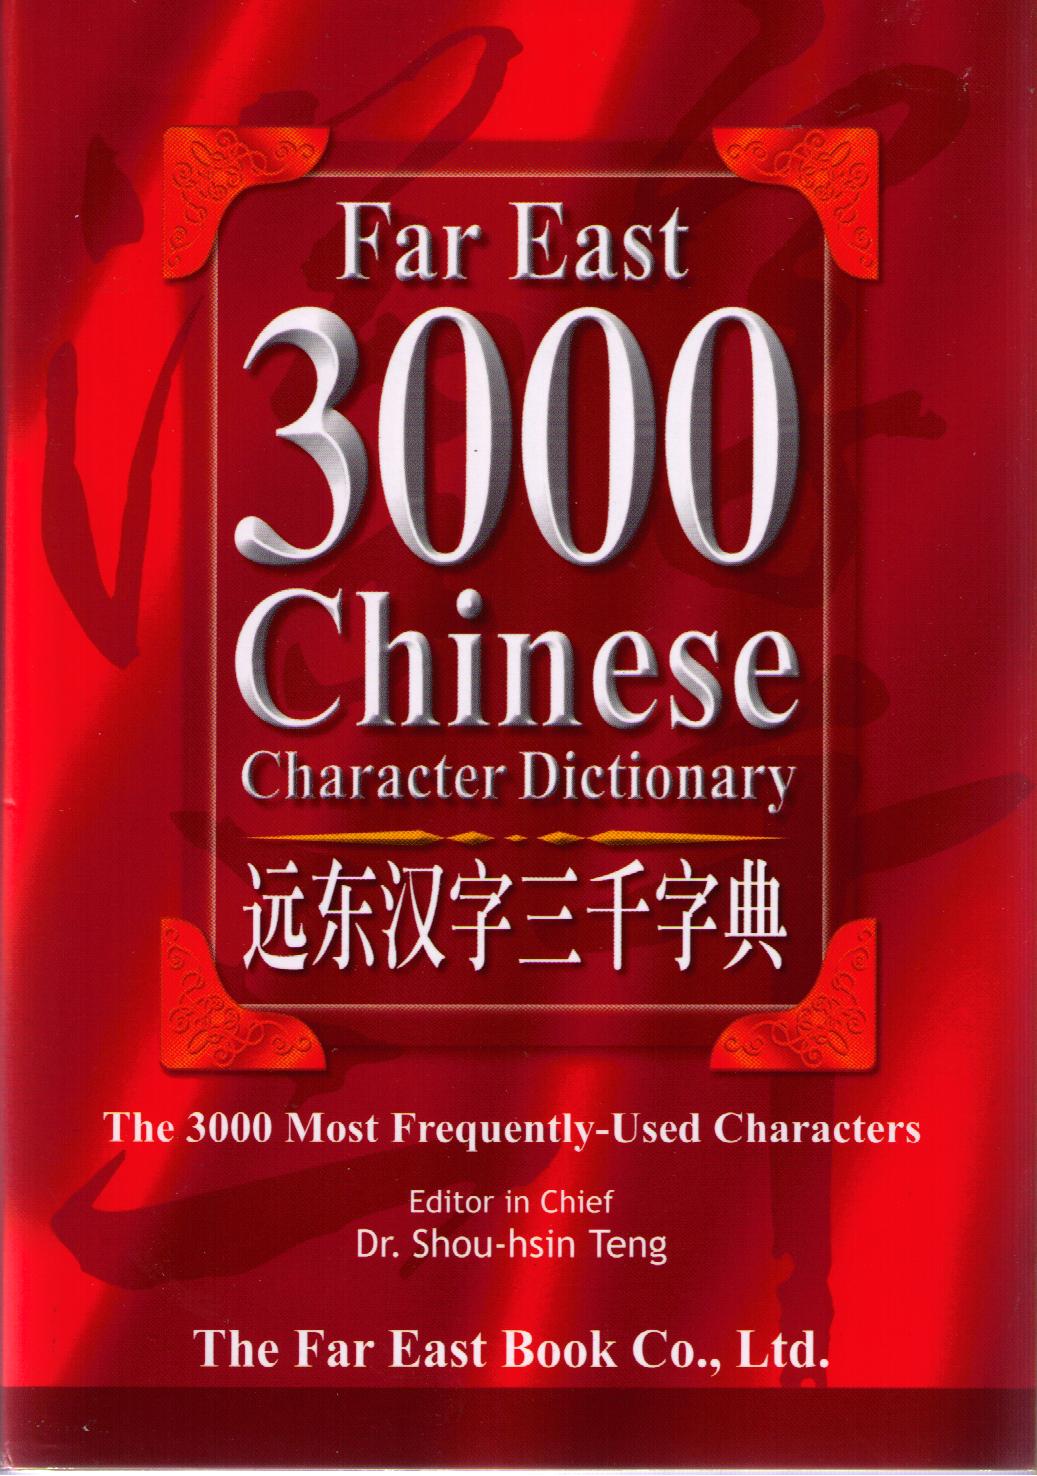 Far East 3000 Chinese Character Dictionary-Simplified  遠東漢字三千字典／簡體版